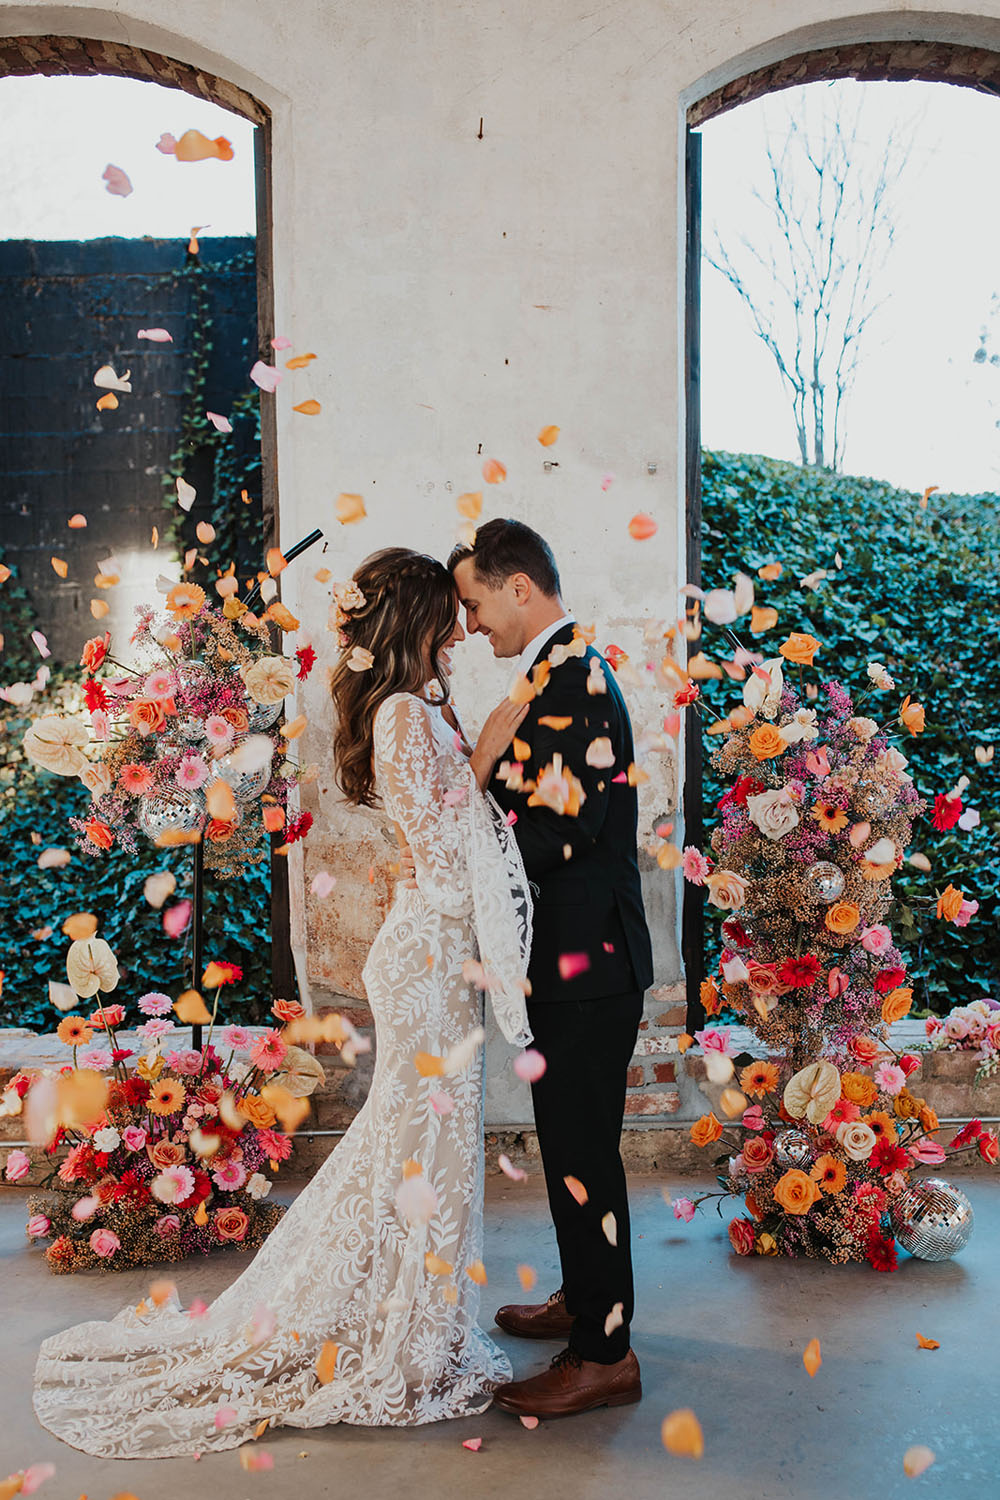 disco themed wedding with colorful flowers